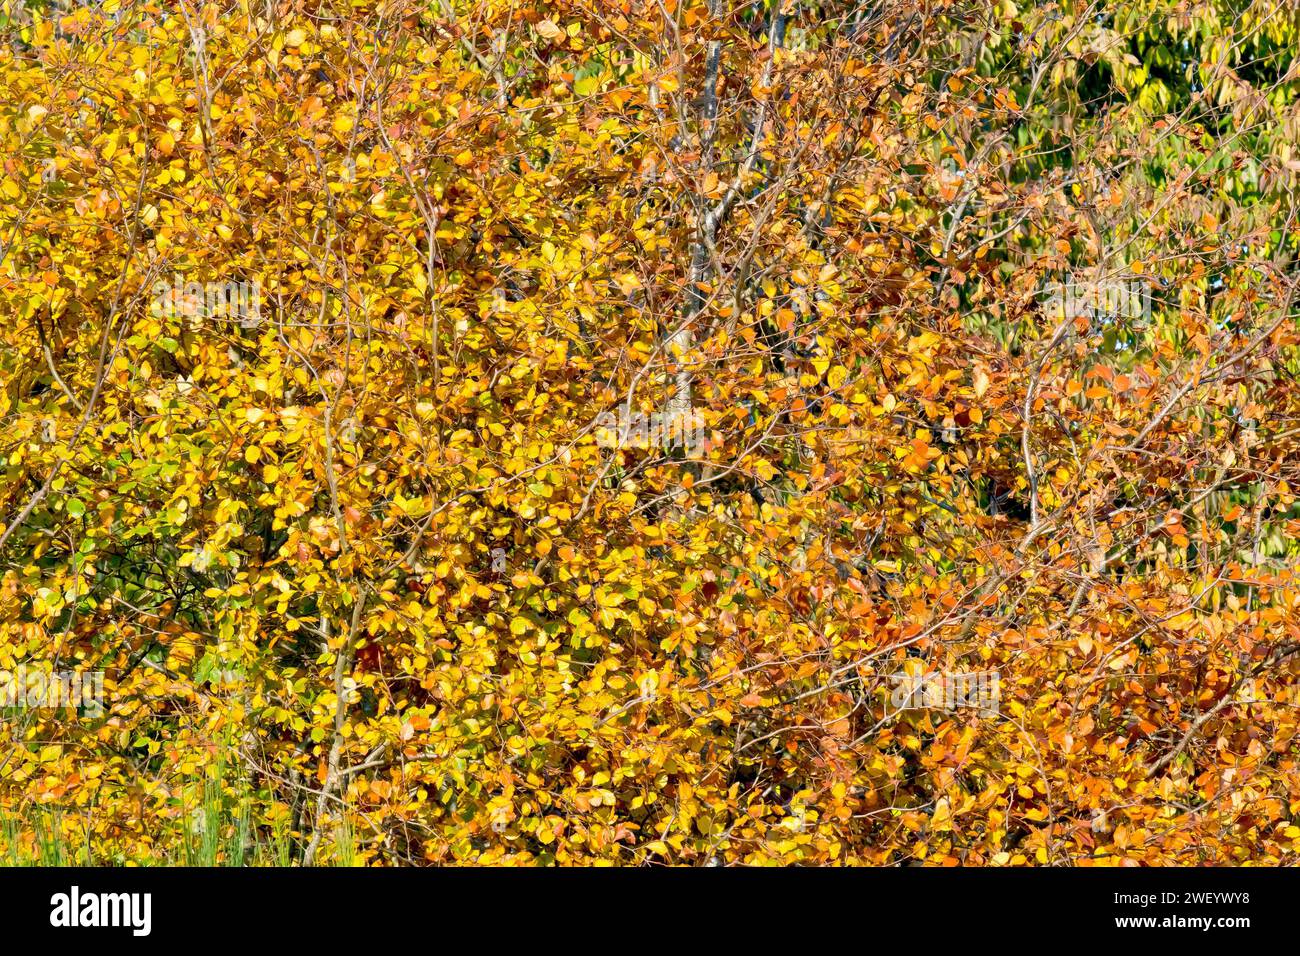 Beech (fagus sylvatica), close up detail showing the bright yellow and gold autumn leaves of a couple of young trees growing close to each other. Stock Photo